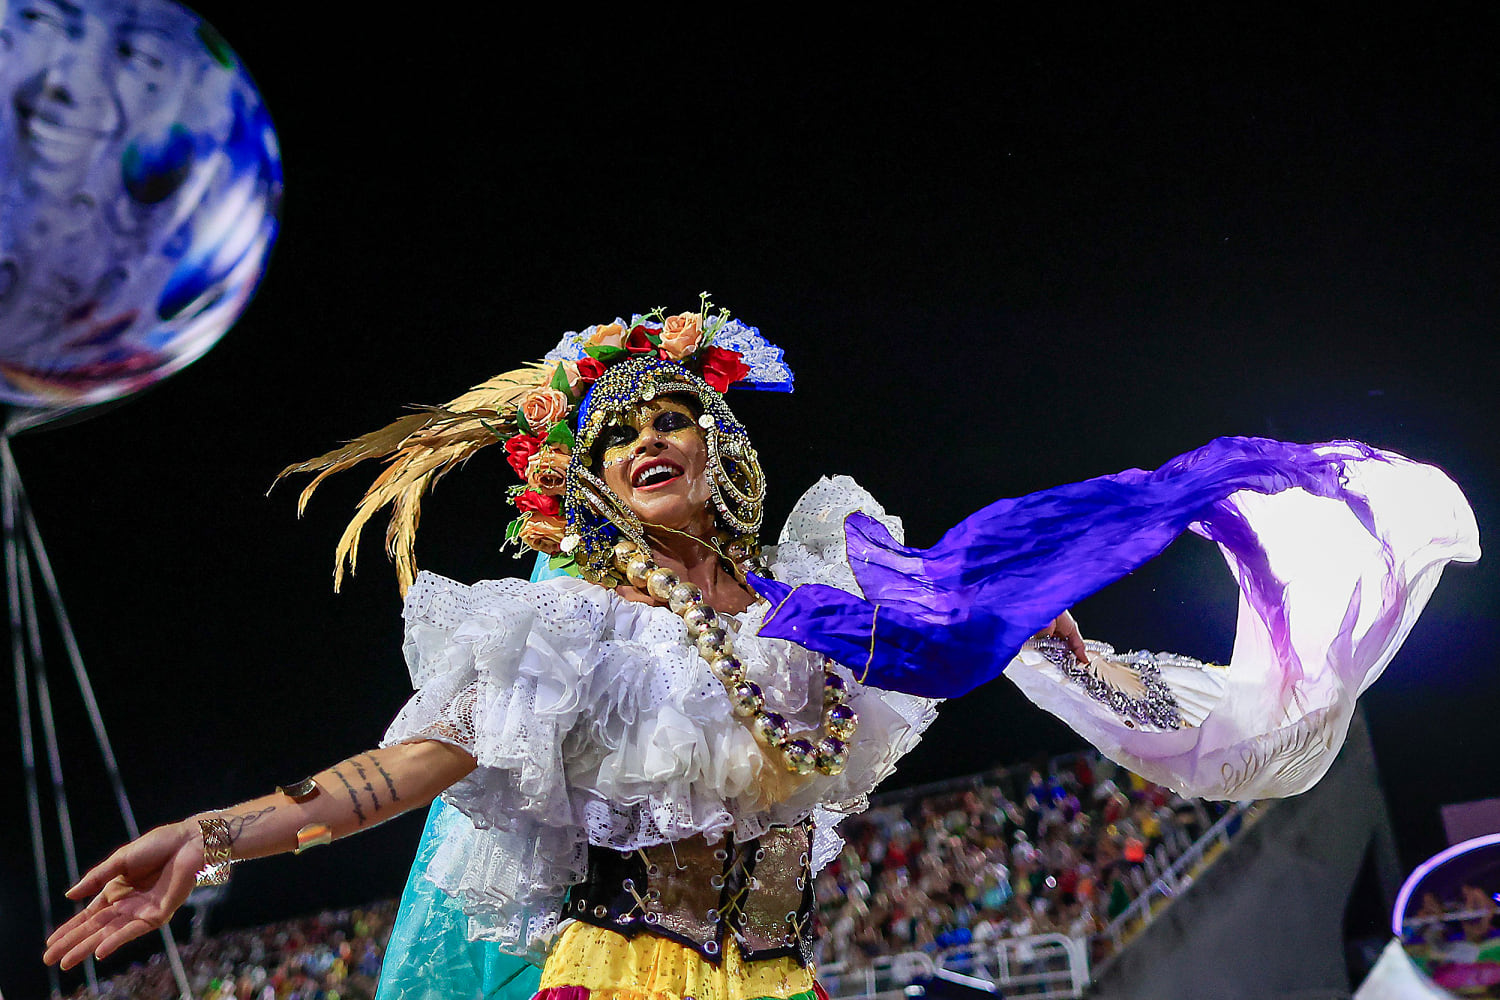 Rio’s Carnival parade makes urgent plea to stop illegal mining in Indigenous lands